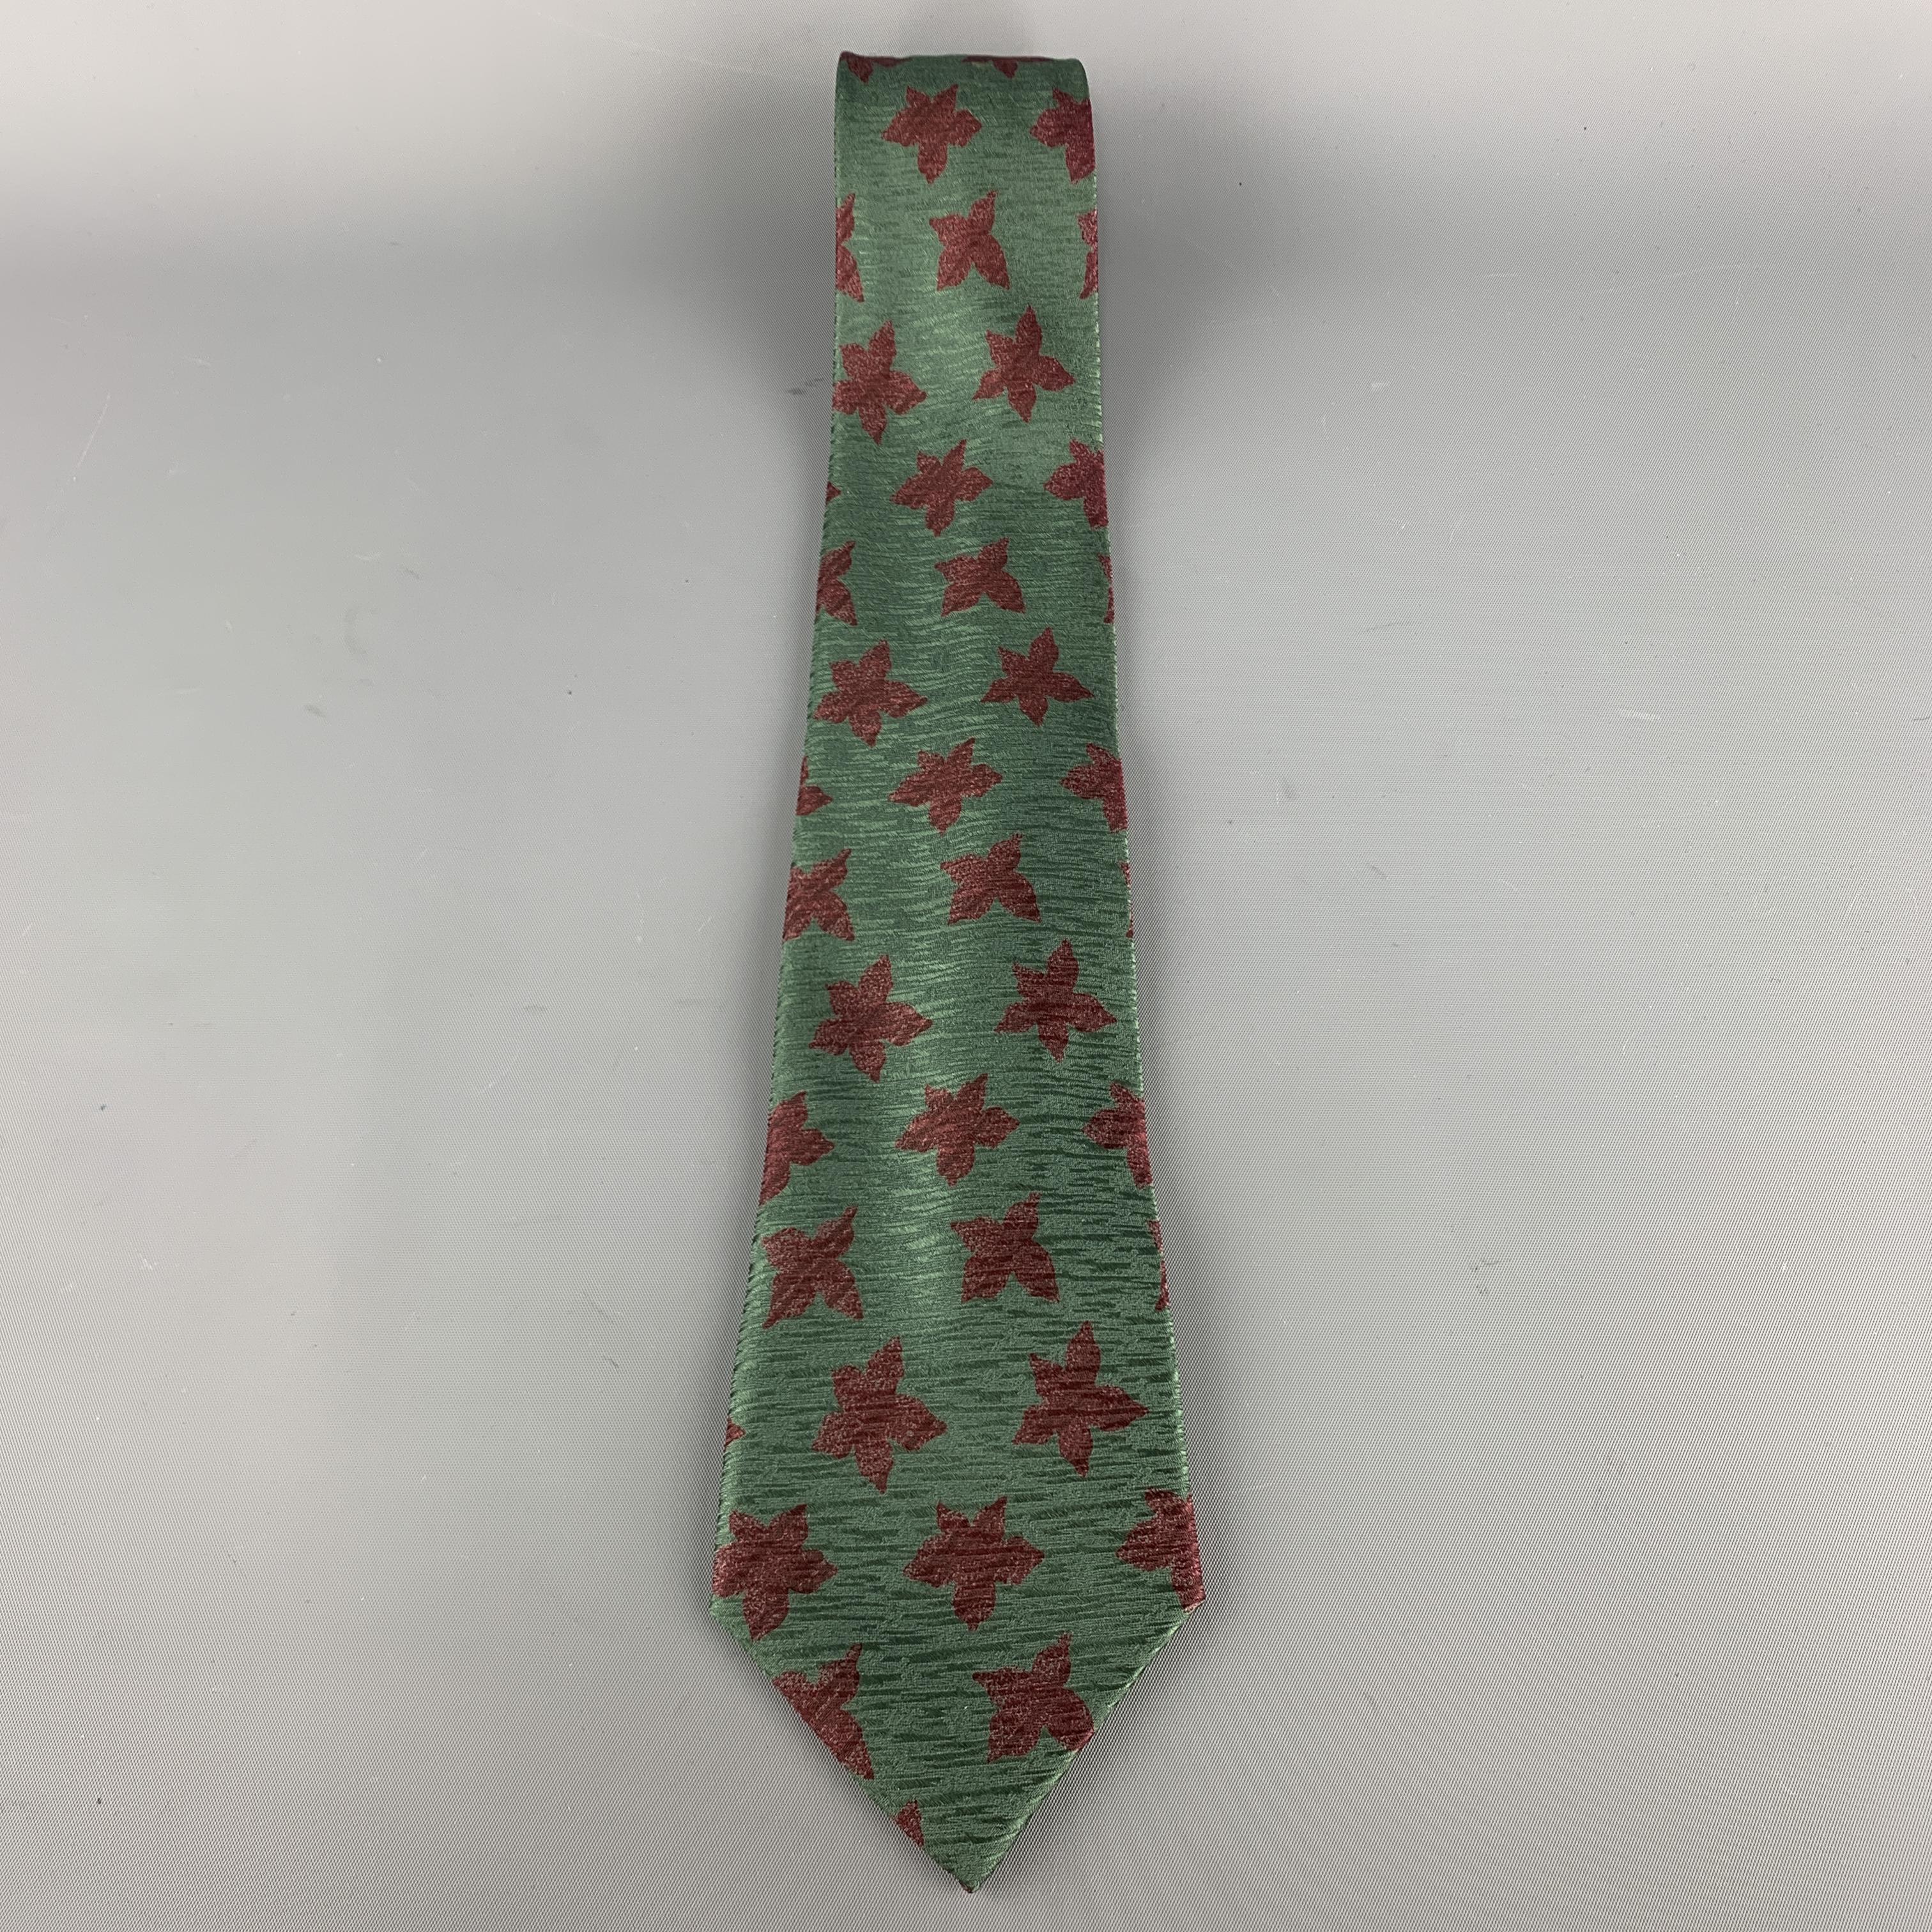 Vintage GIORGIO ARMANI necktie comes in green textured silk with all over brown floral print. Made in Italy.

Excellent Pre-Owned Condition.

Width: 3.5 in.